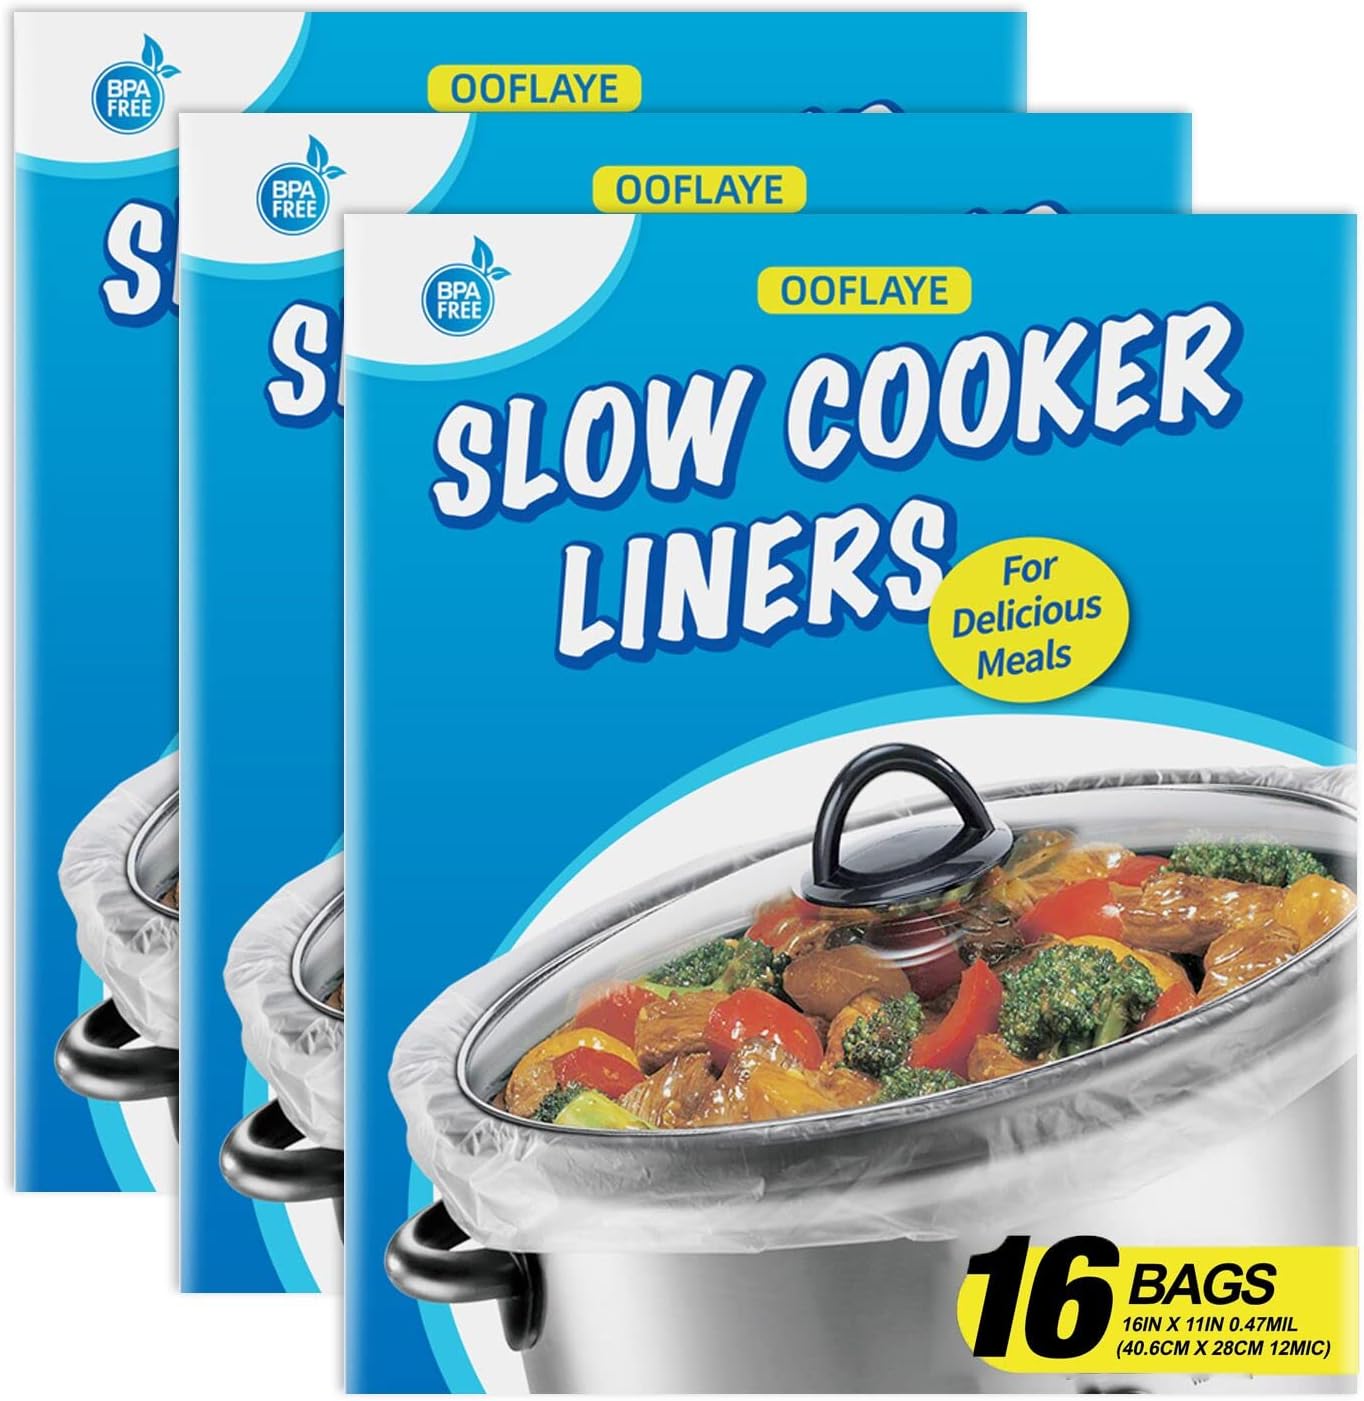 48 Bags Slow Cooker Liners, Disposable Multi Use Cooking Bags,Large Size Fit 3QT to 8QT, Plastic Bags for Slow Cooker, Pans, Aluminum Cooking Trays, BPA Free-13 x 21 Inches, 3 quarts (48)